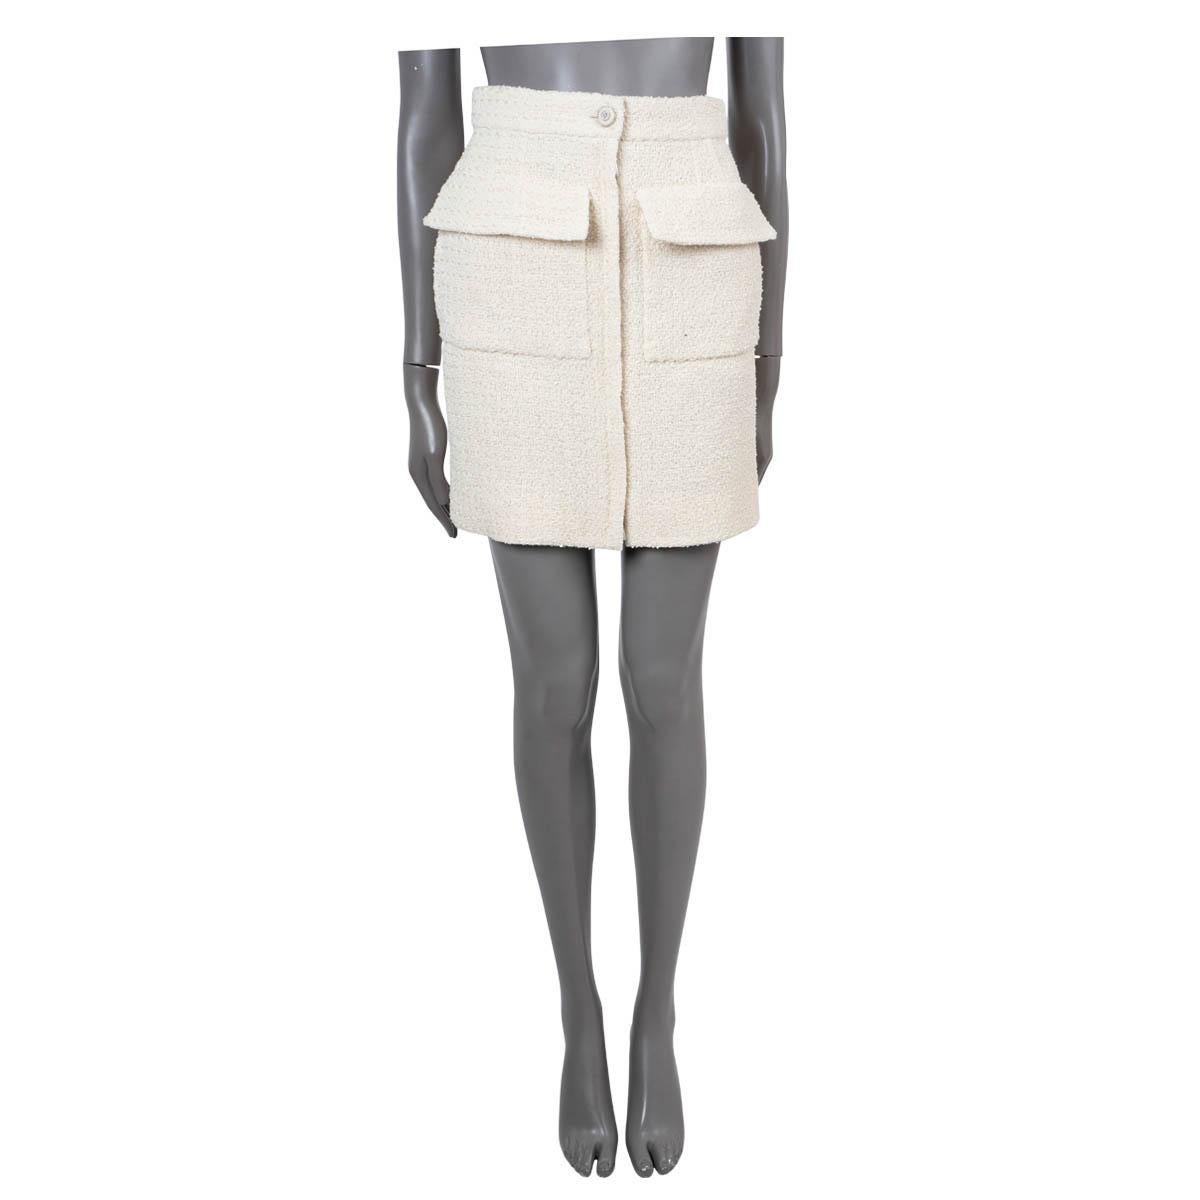 100% authentic Chanel tweed mini skirt in ecru cotton (with 10% polyamide). Features two flap pockets on the front with side slit pockets. Closes with a button and two-way zipper on the front. Lined in handkerchief printed cotton (with 7% silk).